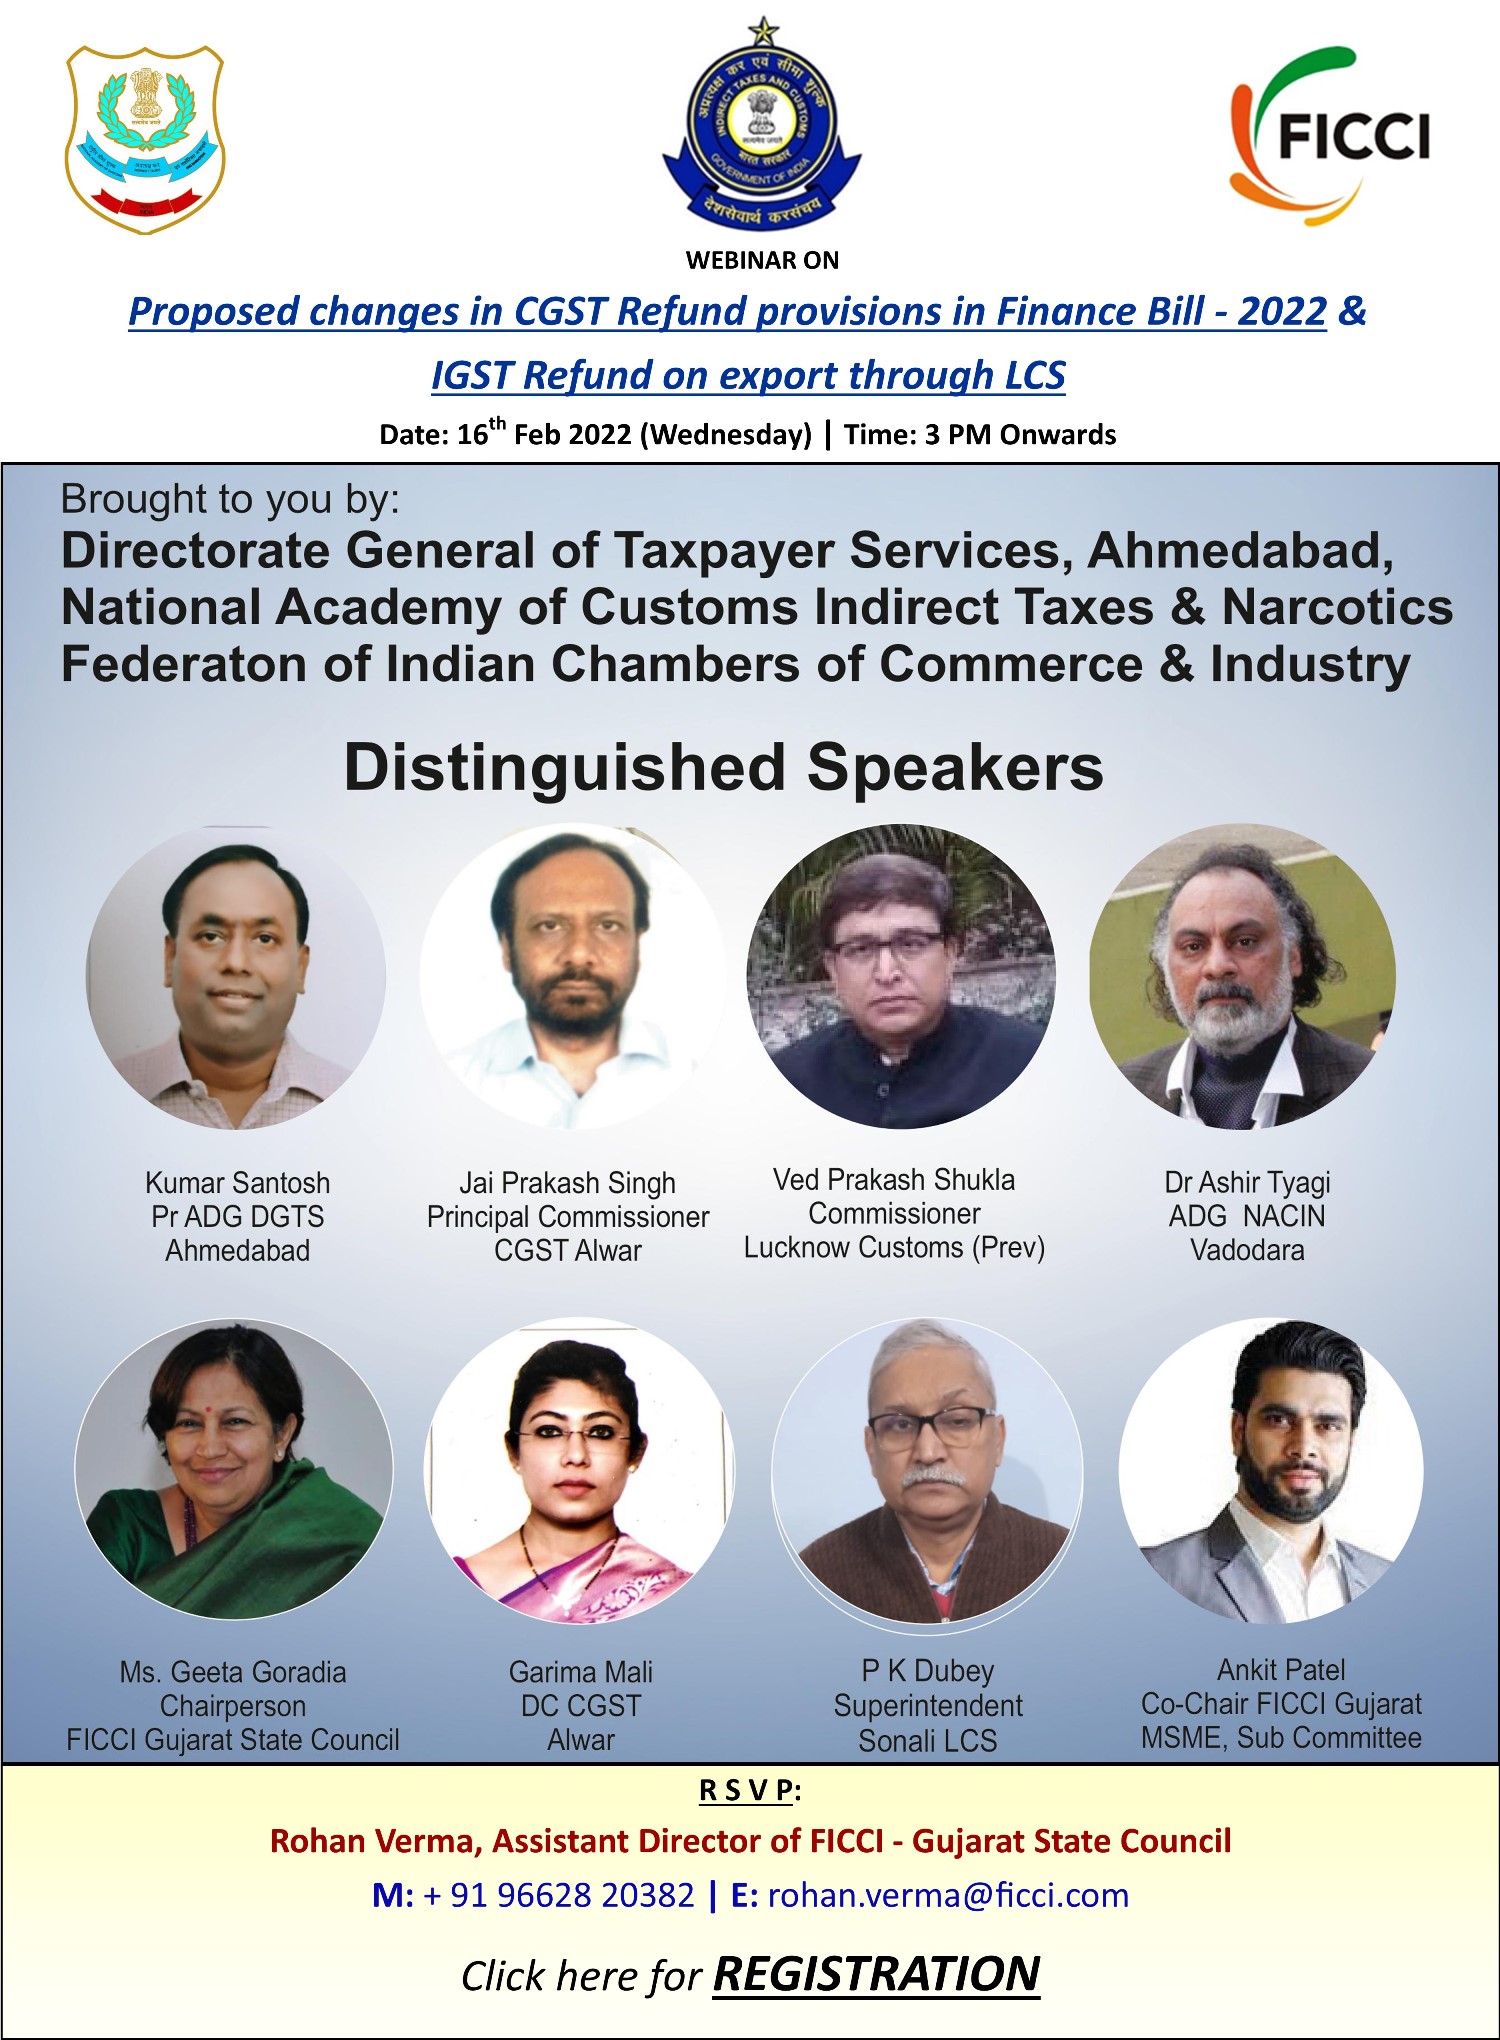 Webinar on Proposed Changes in CGST Refund Provisions in Finance Bill - 2022 & IGST Refund on Export through LCS  